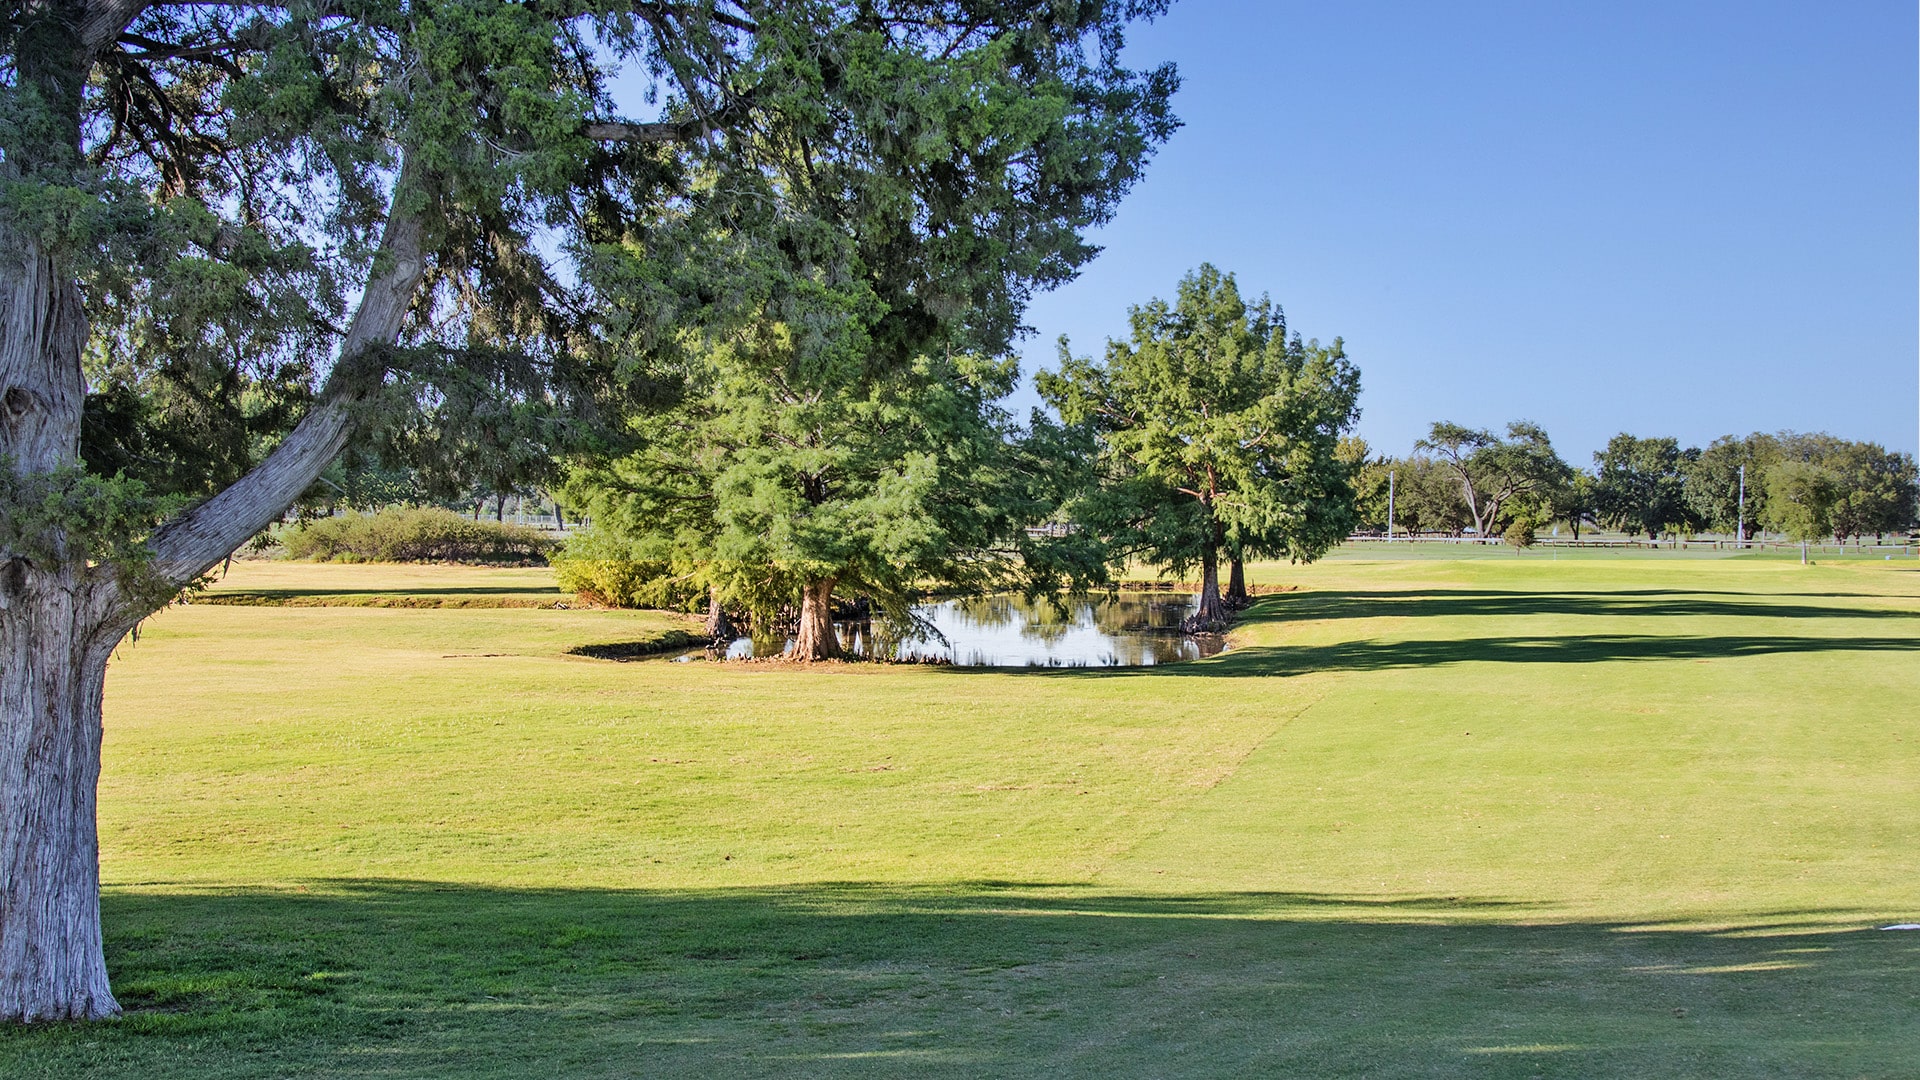 Sayre National Golf Course, Hole 5 - 'Double Trouble': Large tree, pond, and lush green.